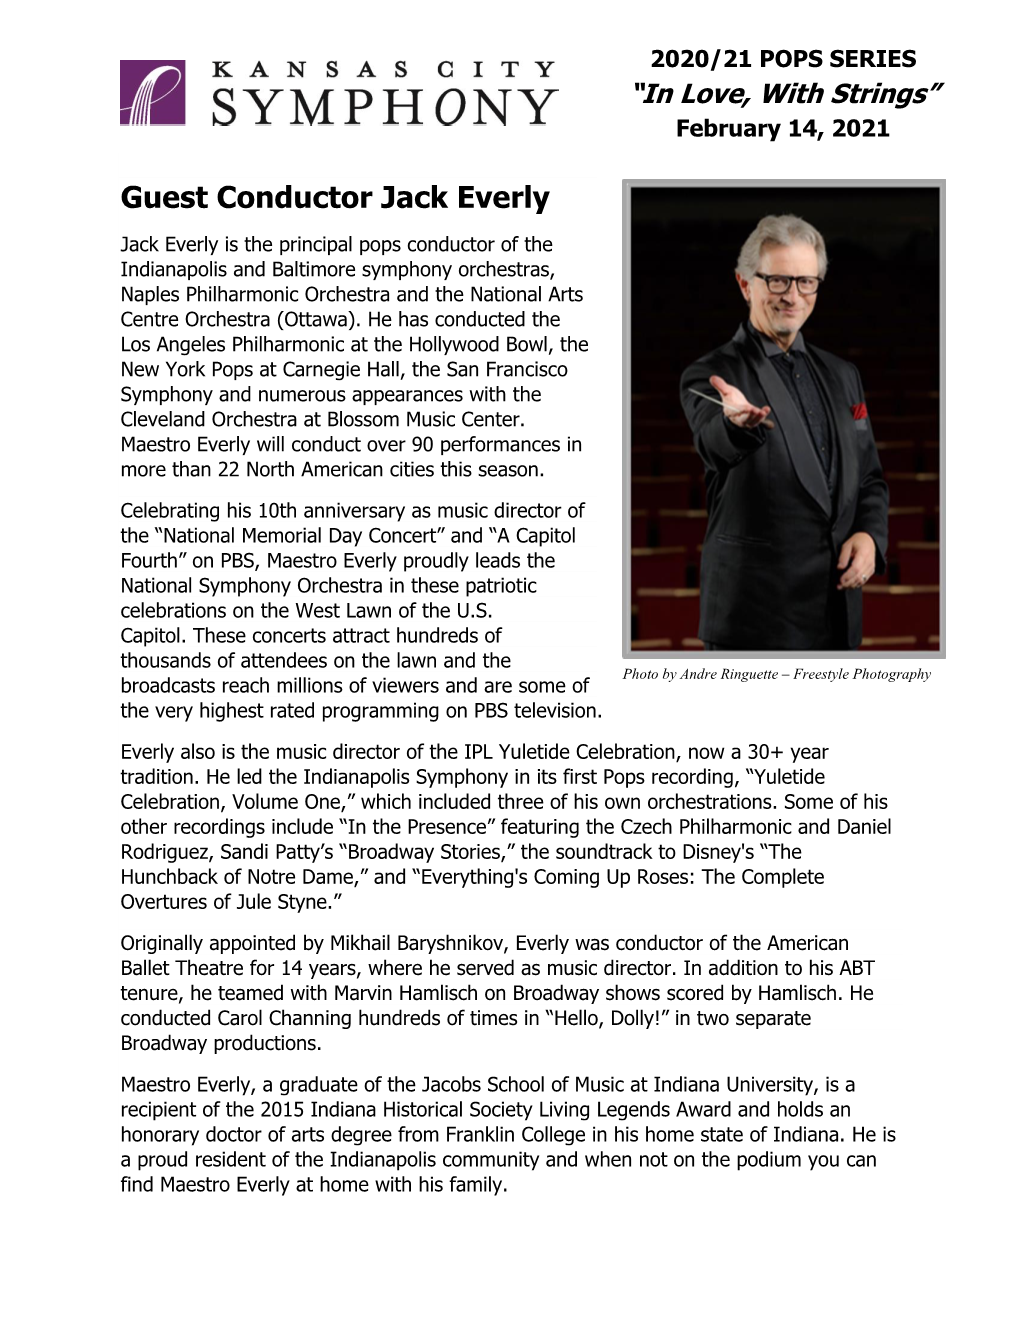 Bio of Guest Conductor Jack Everly